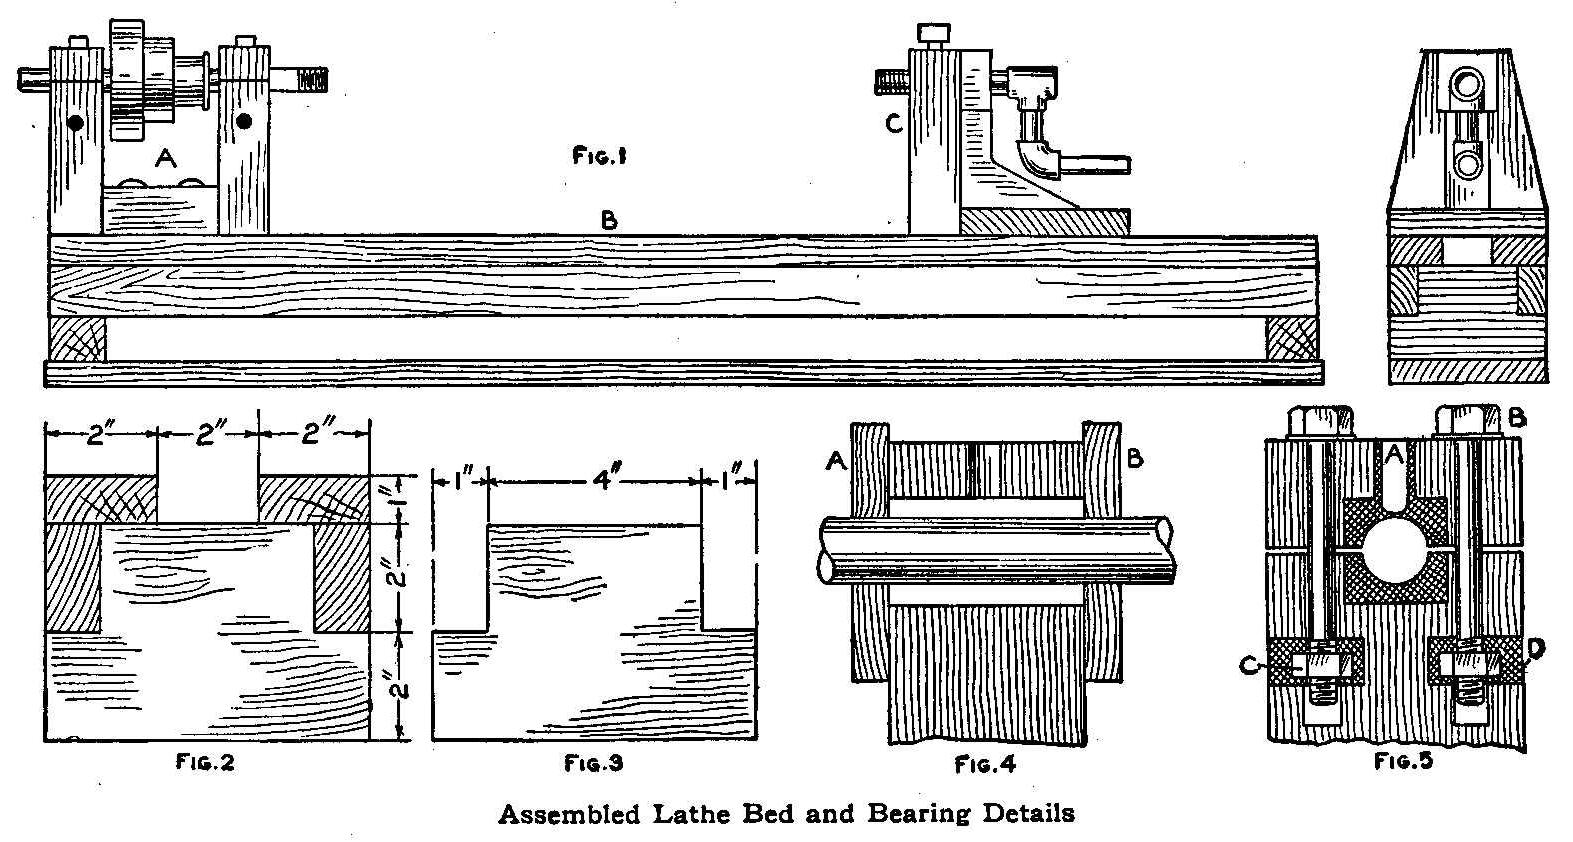 Assembled Lathe Bed and Bearing Details 